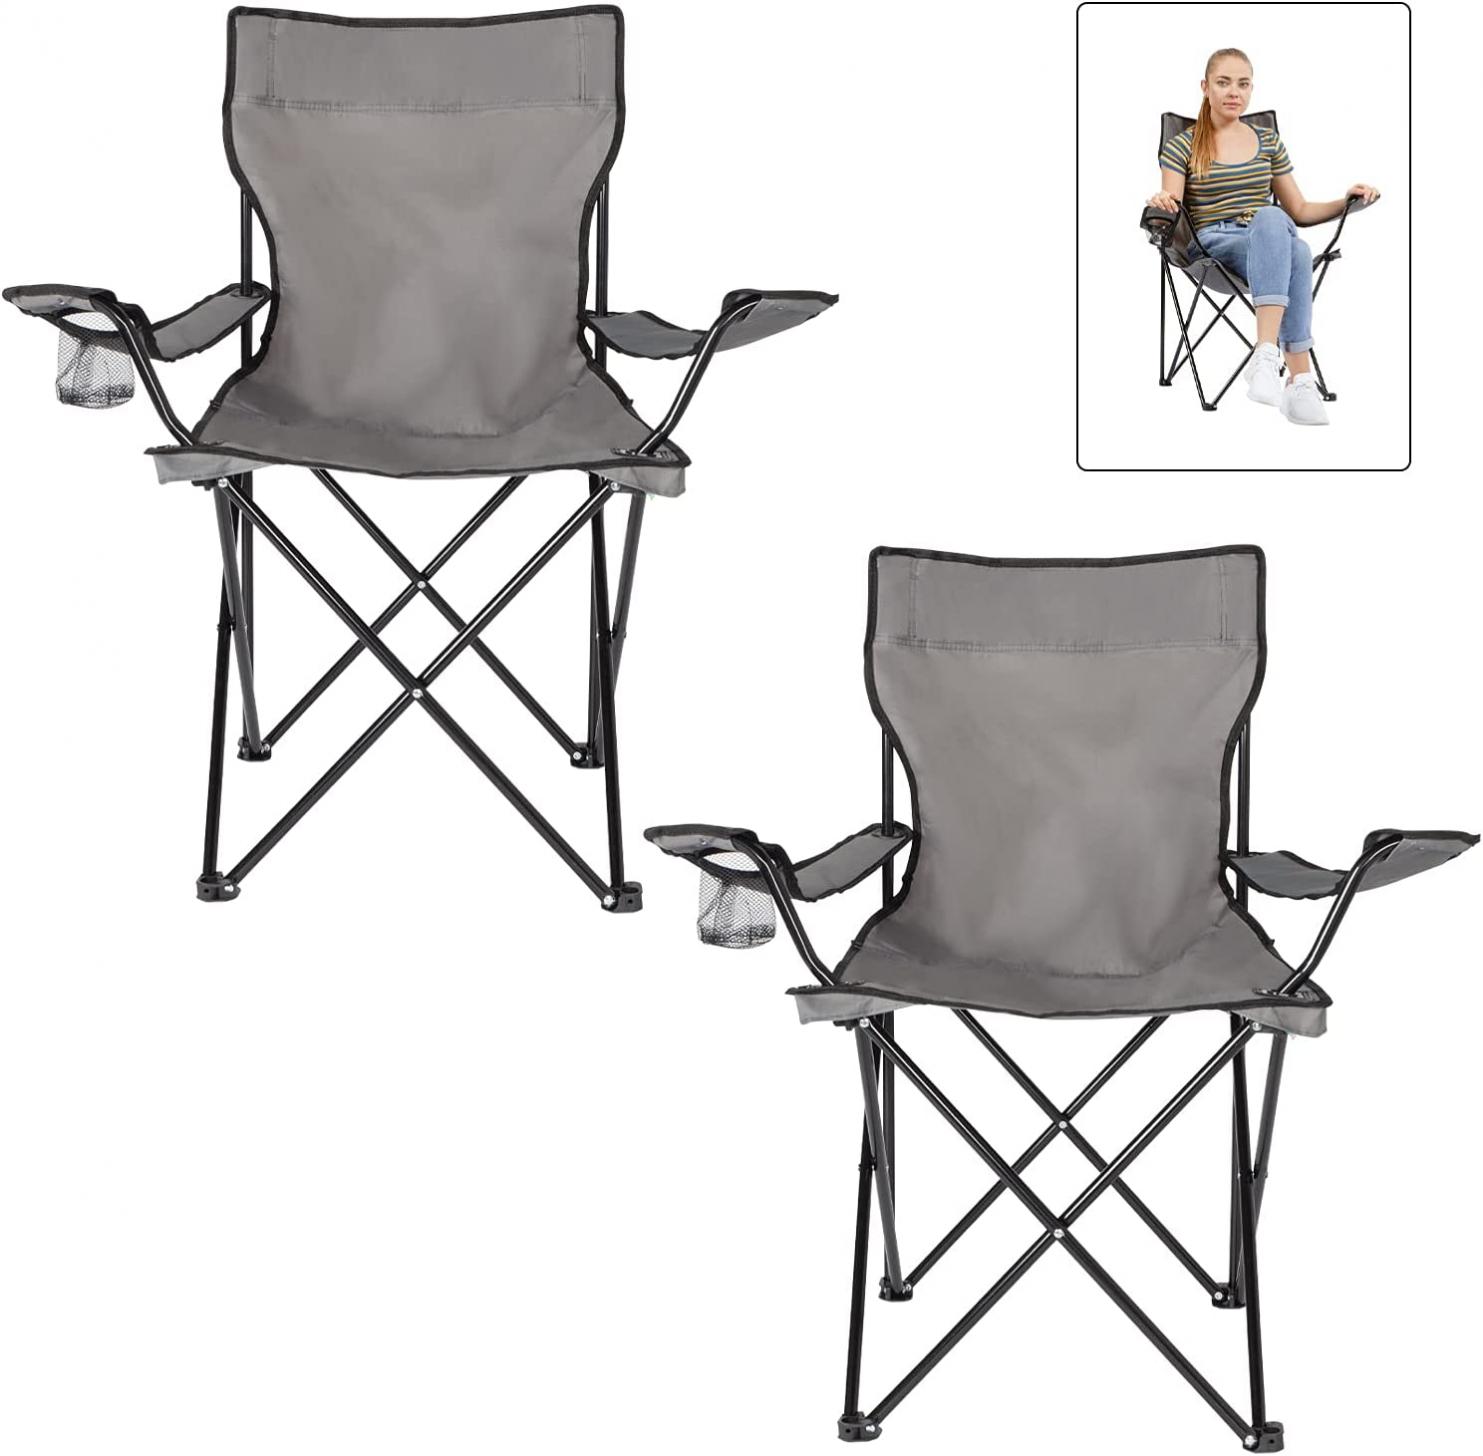 Homewell 2 Pack Outdoor Folding Chair for Camping, Beach, Concerts, Sports Games, Pools, Road Trips with Easy Carry Storage Bag (Grey)